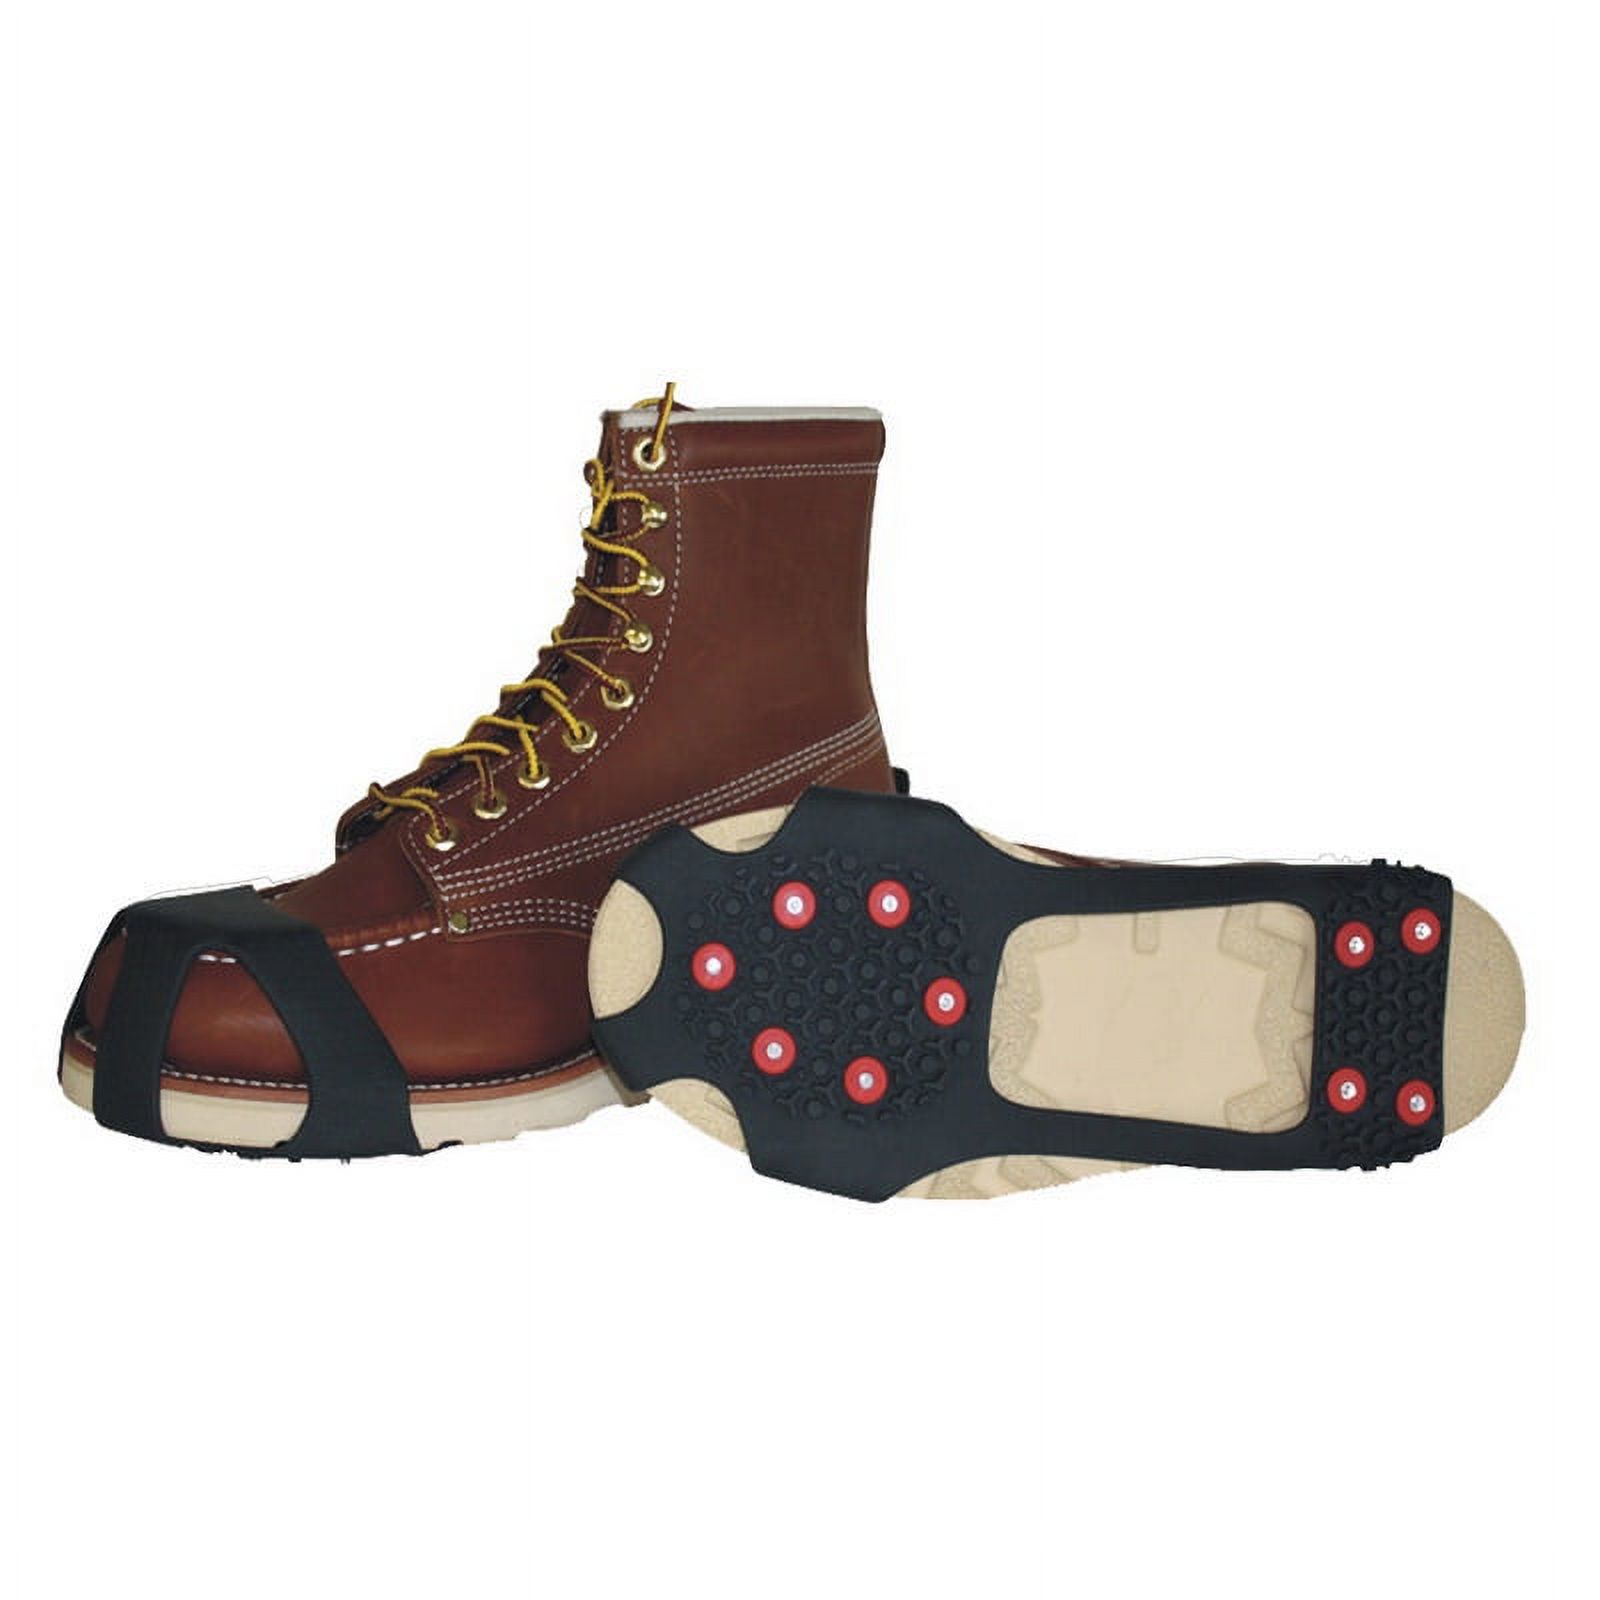 Tingley Winter-Tuff Ice Traction Spikes - Studded Outsole XXL - image 1 of 3